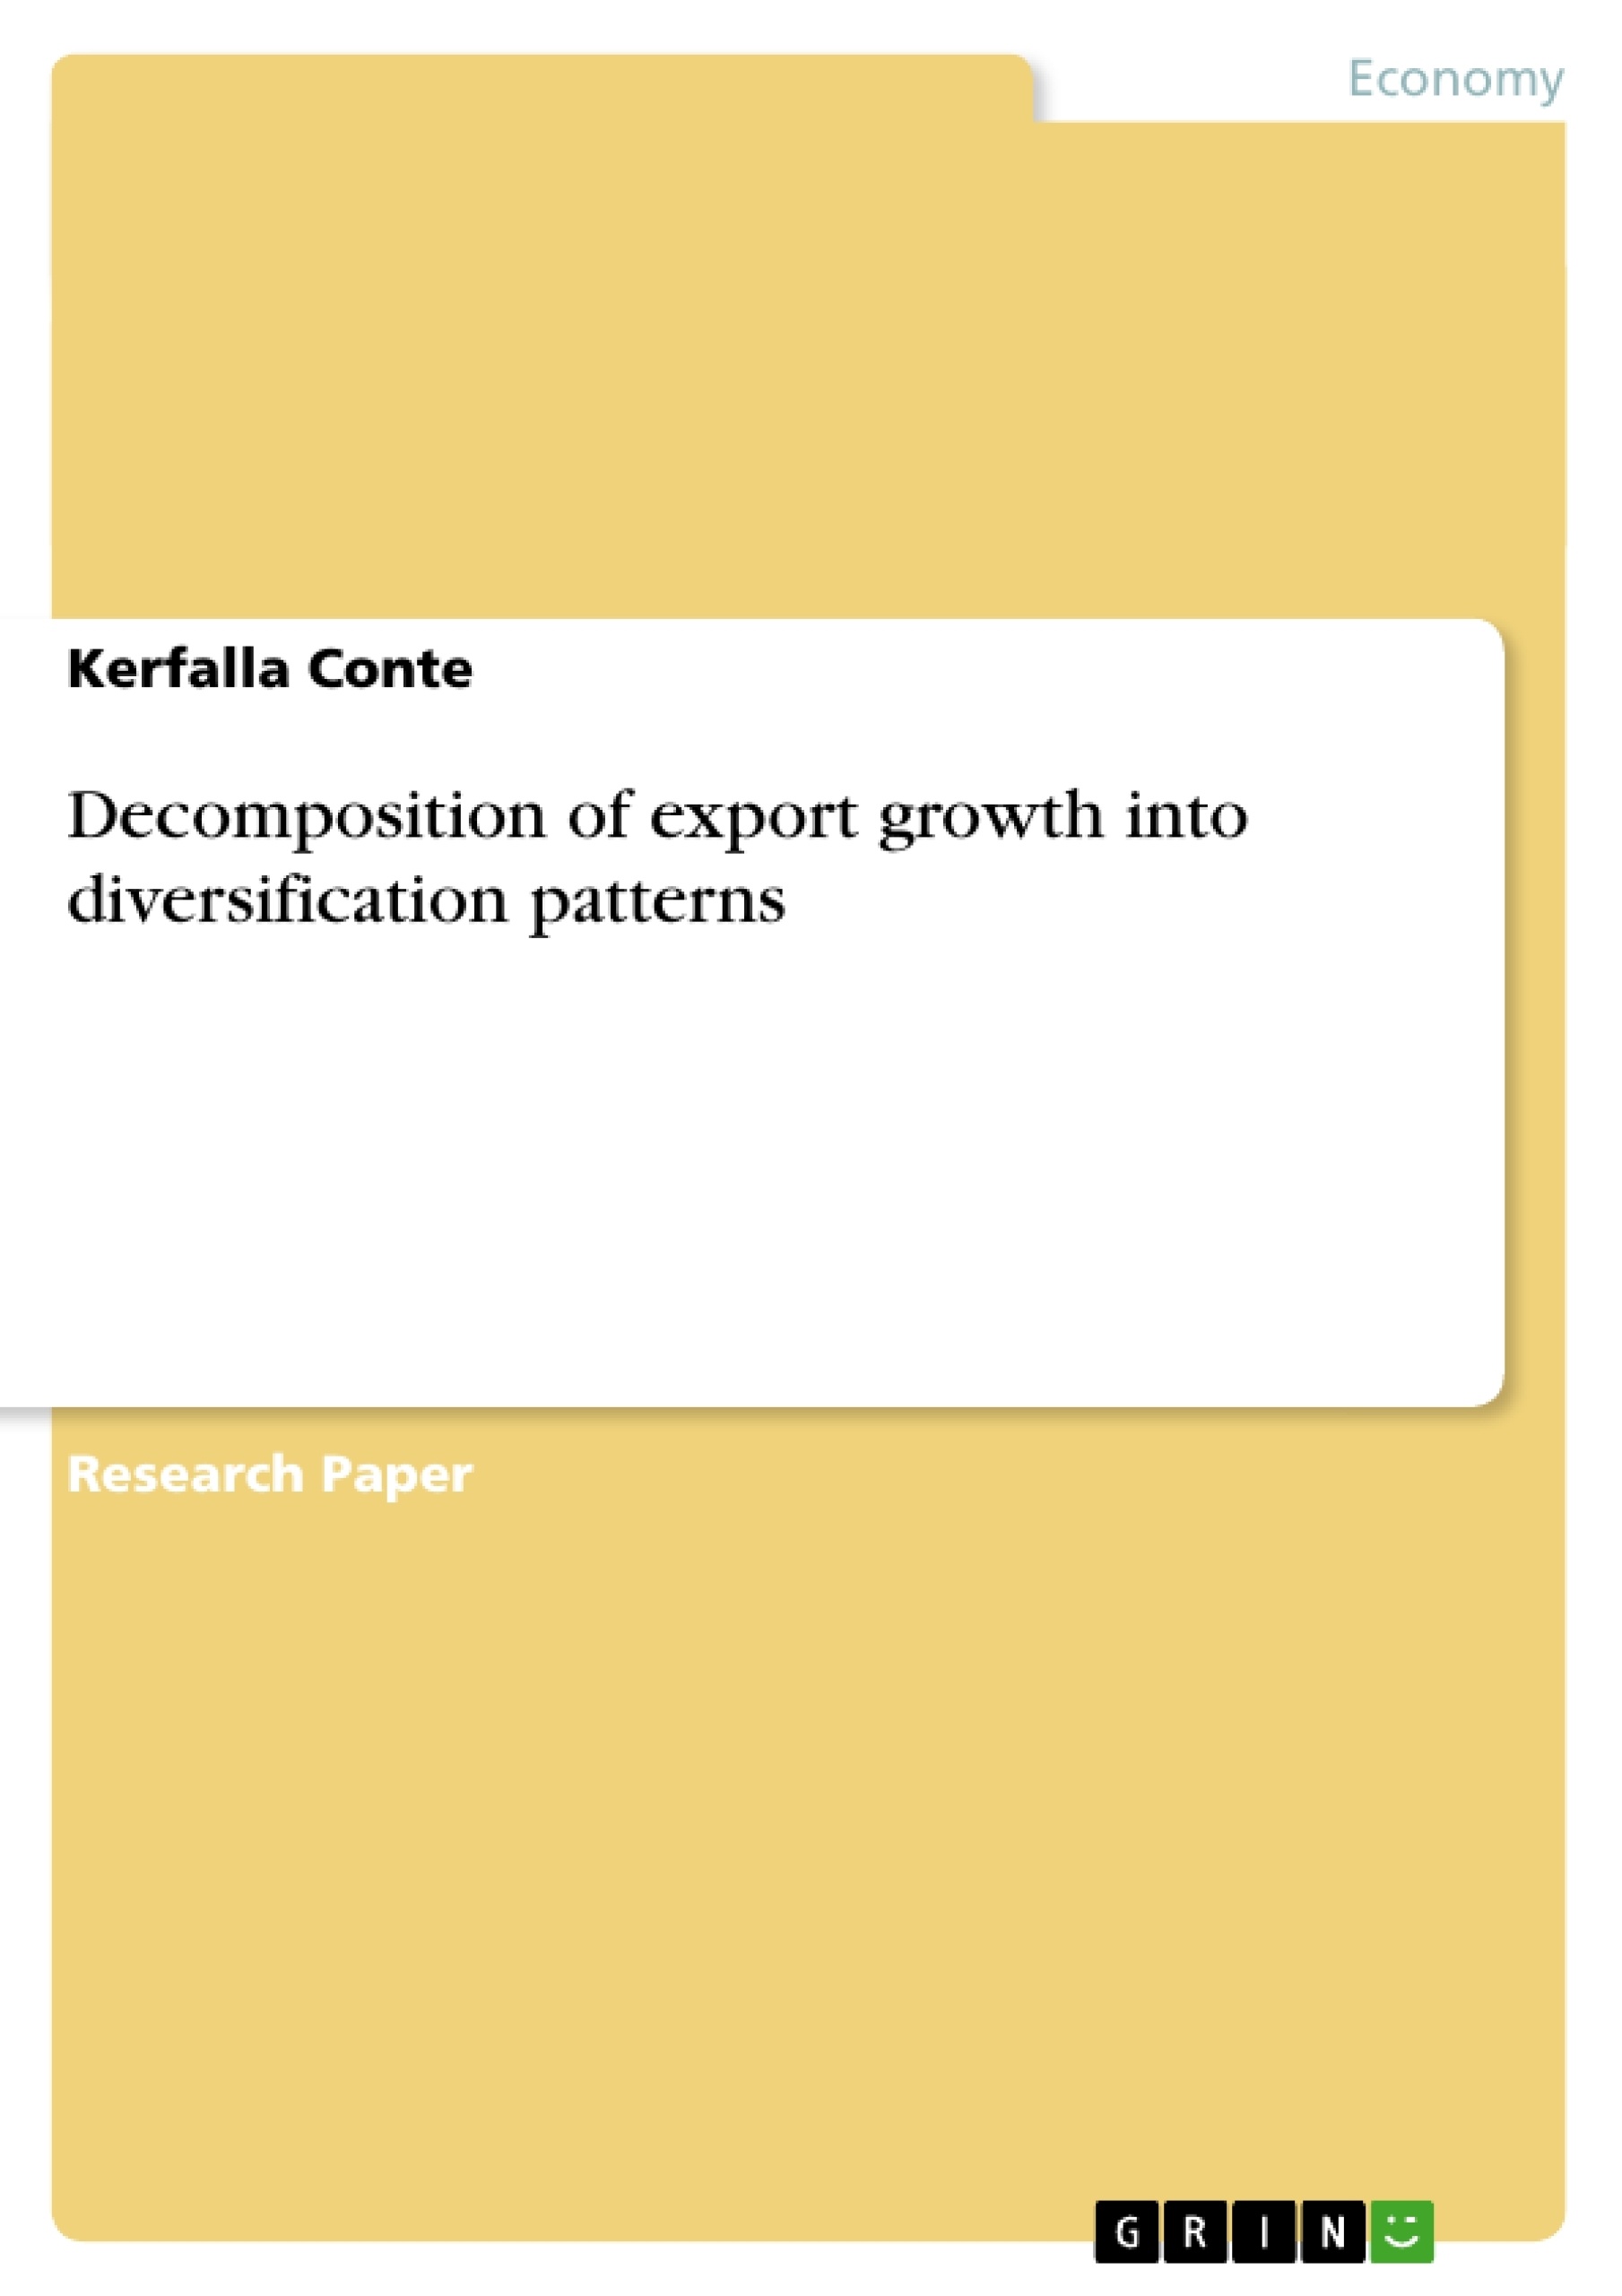 Title: Decomposition of export growth into diversification patterns